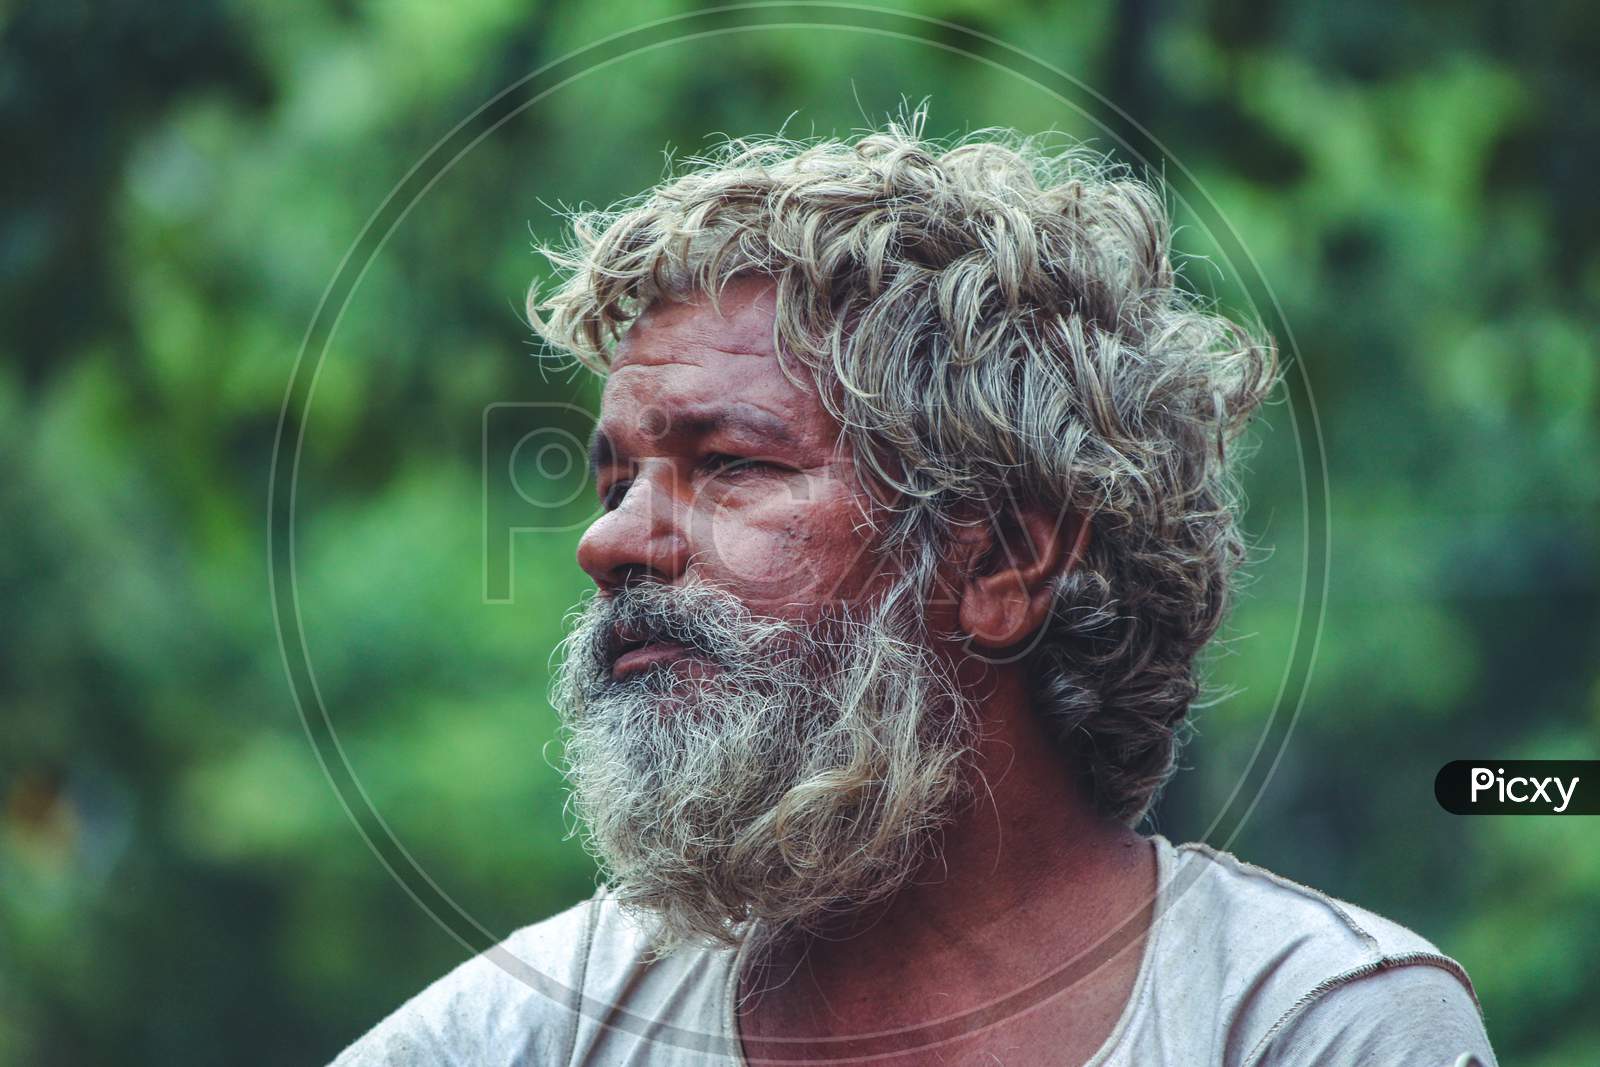 New Delhi, Delhi/ India- May 31 2020:A Portrait Of An Old Man With Long Grown Hair And White Beard